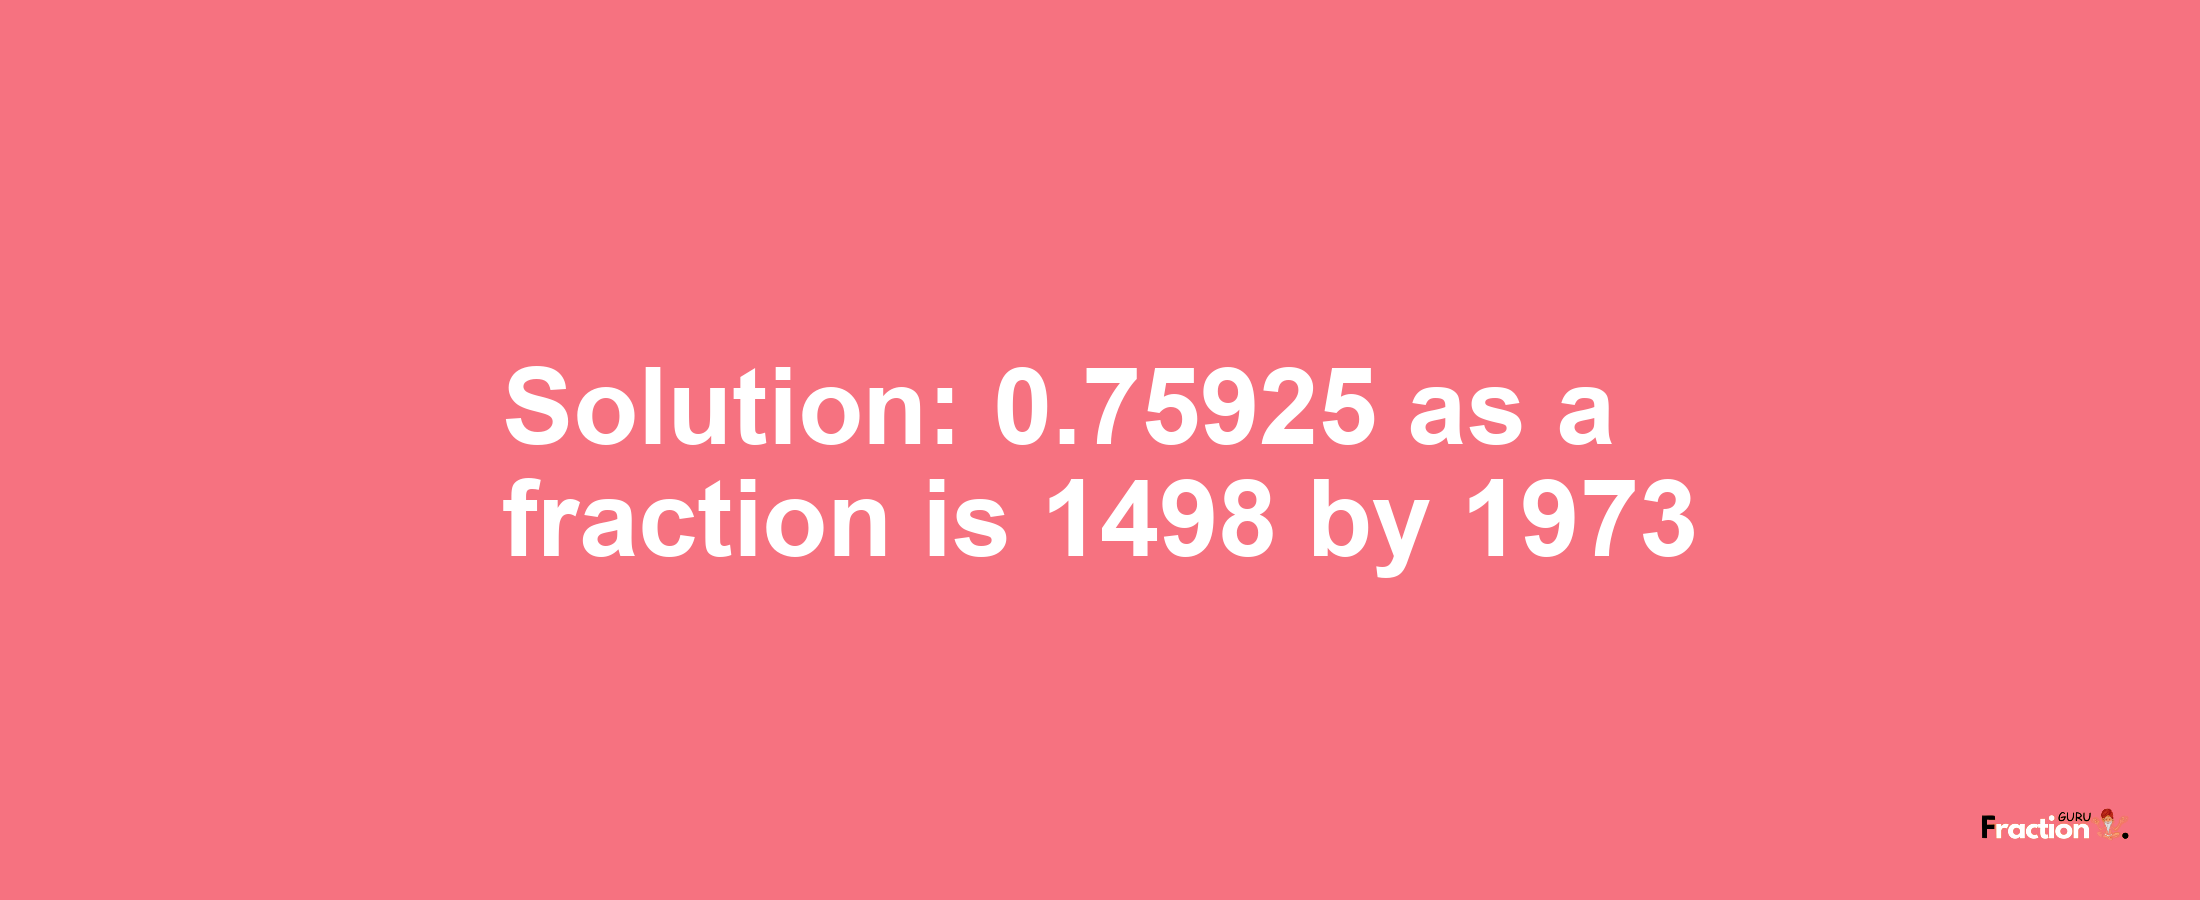 Solution:0.75925 as a fraction is 1498/1973